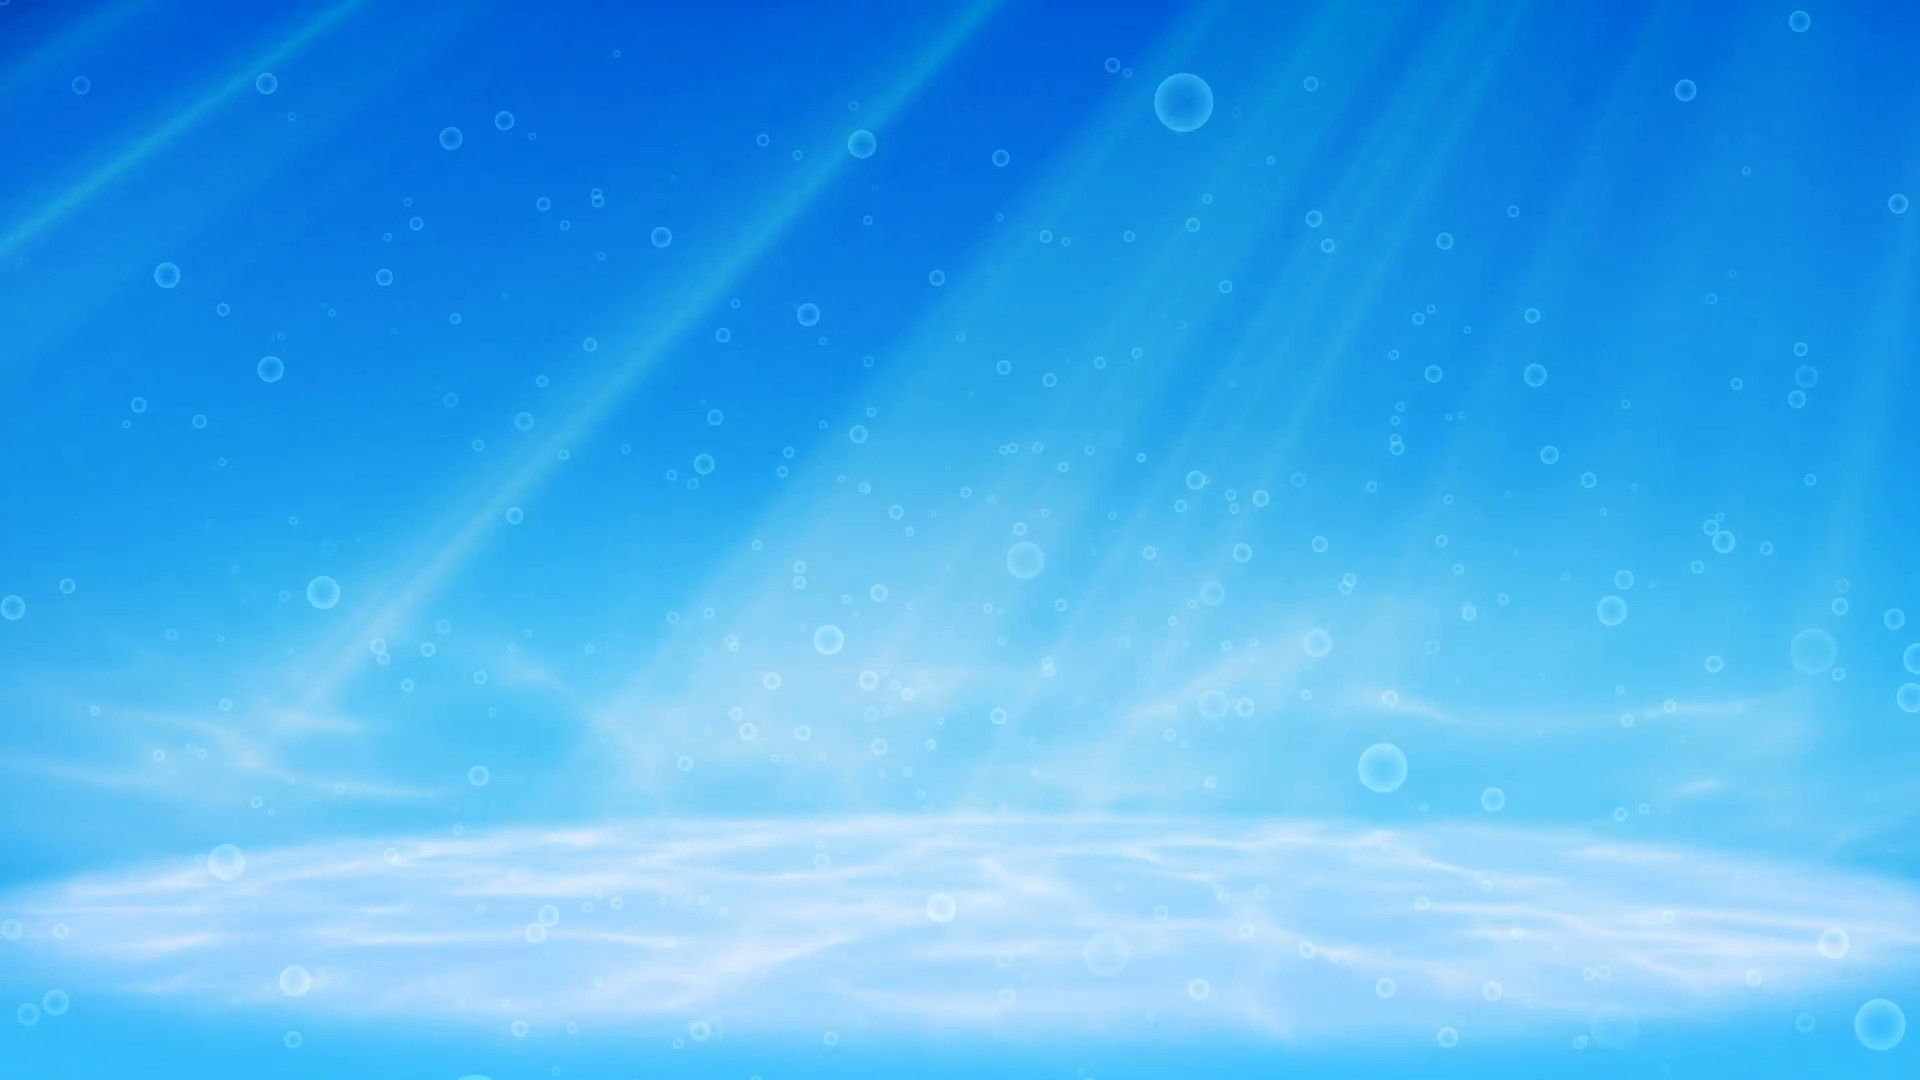 1920x1080 Under water scene with light rays and bubbles loop Motion Background -  VideoBlocks